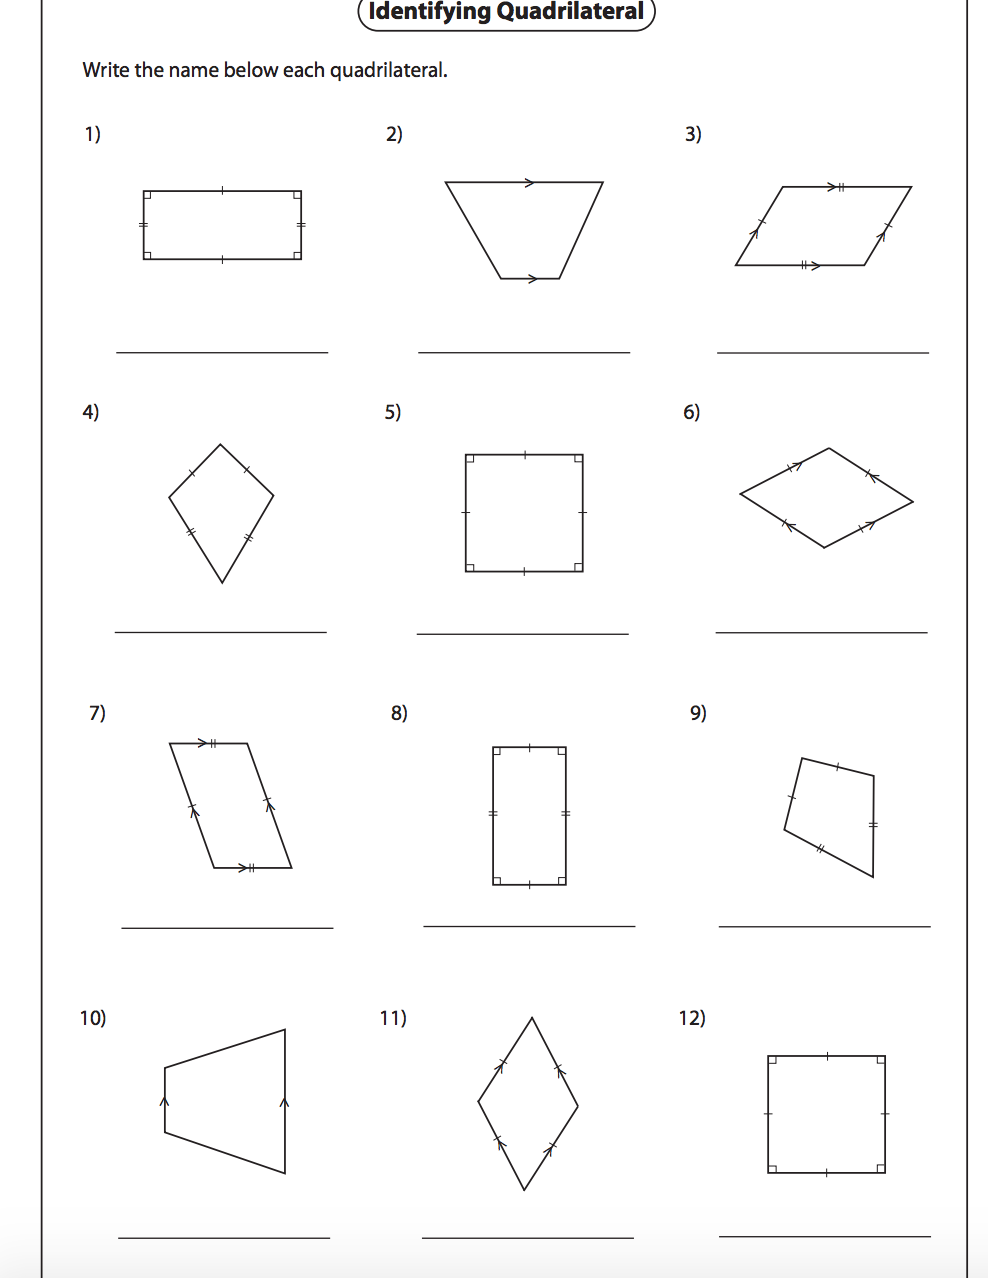 classifying-quadrilaterals-worksheets